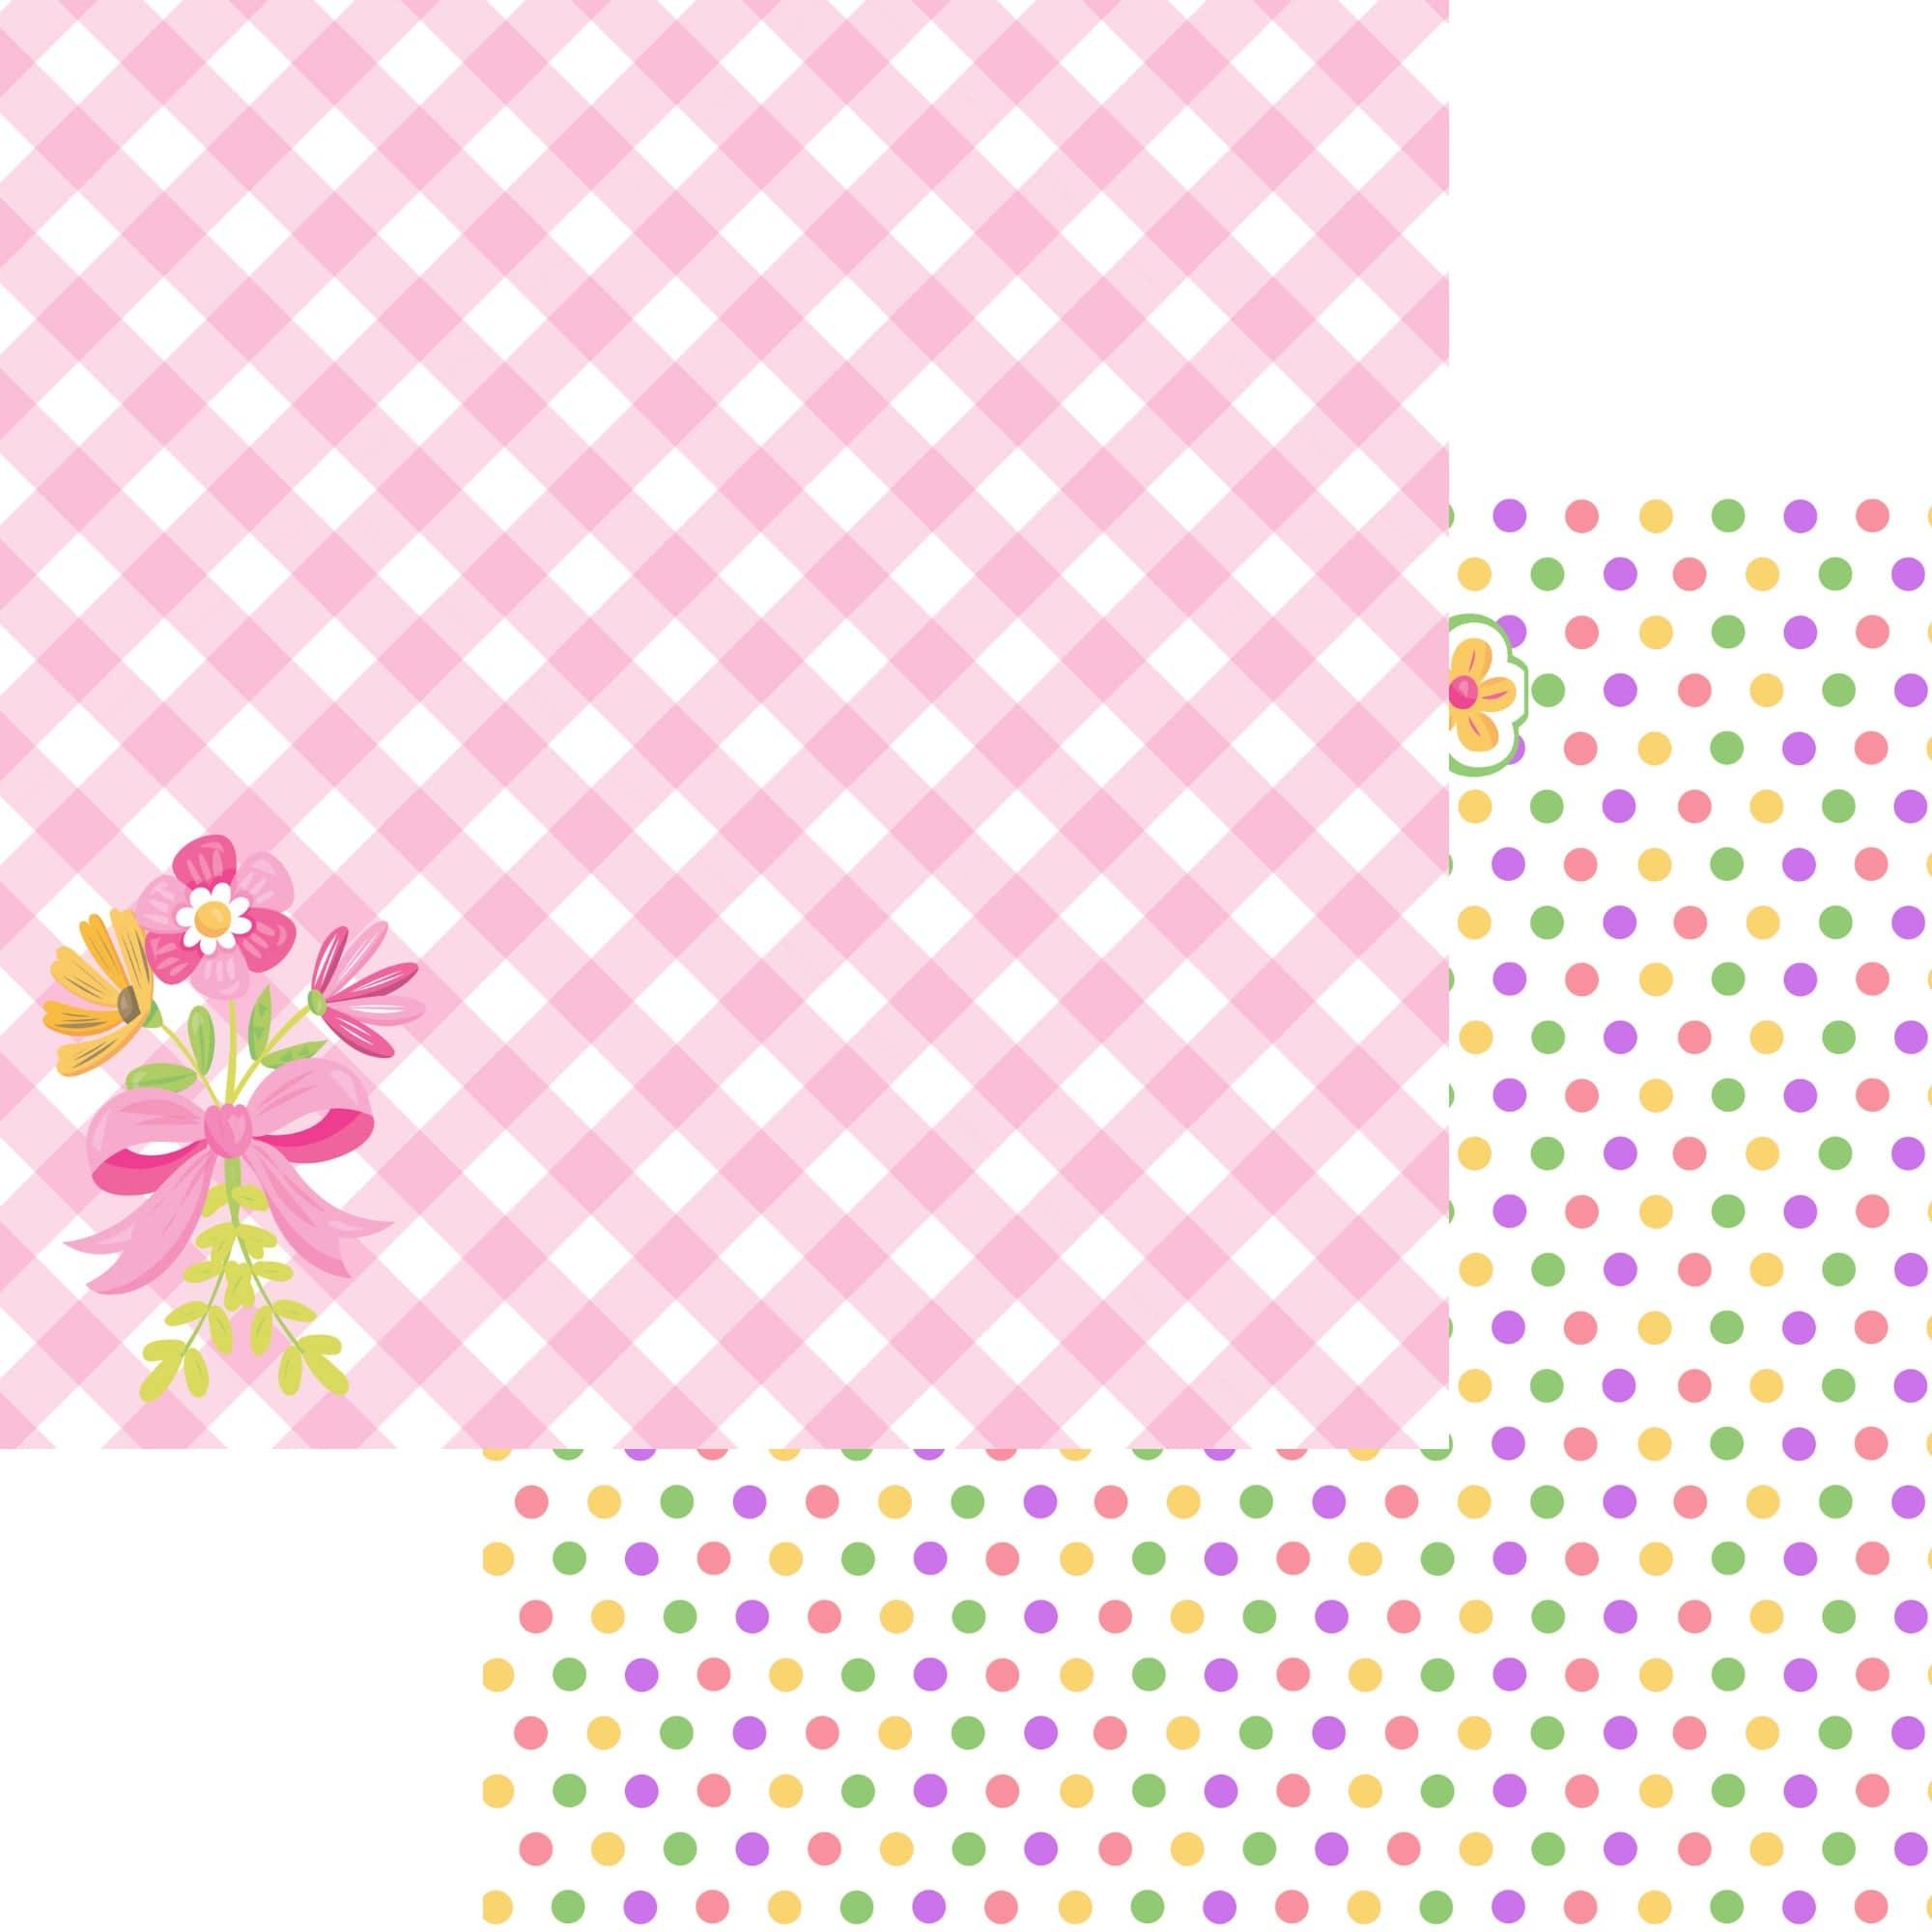 Mother's Day 12 x 12 Scrapbook Paper & Embellishment Kit by SSC Designs